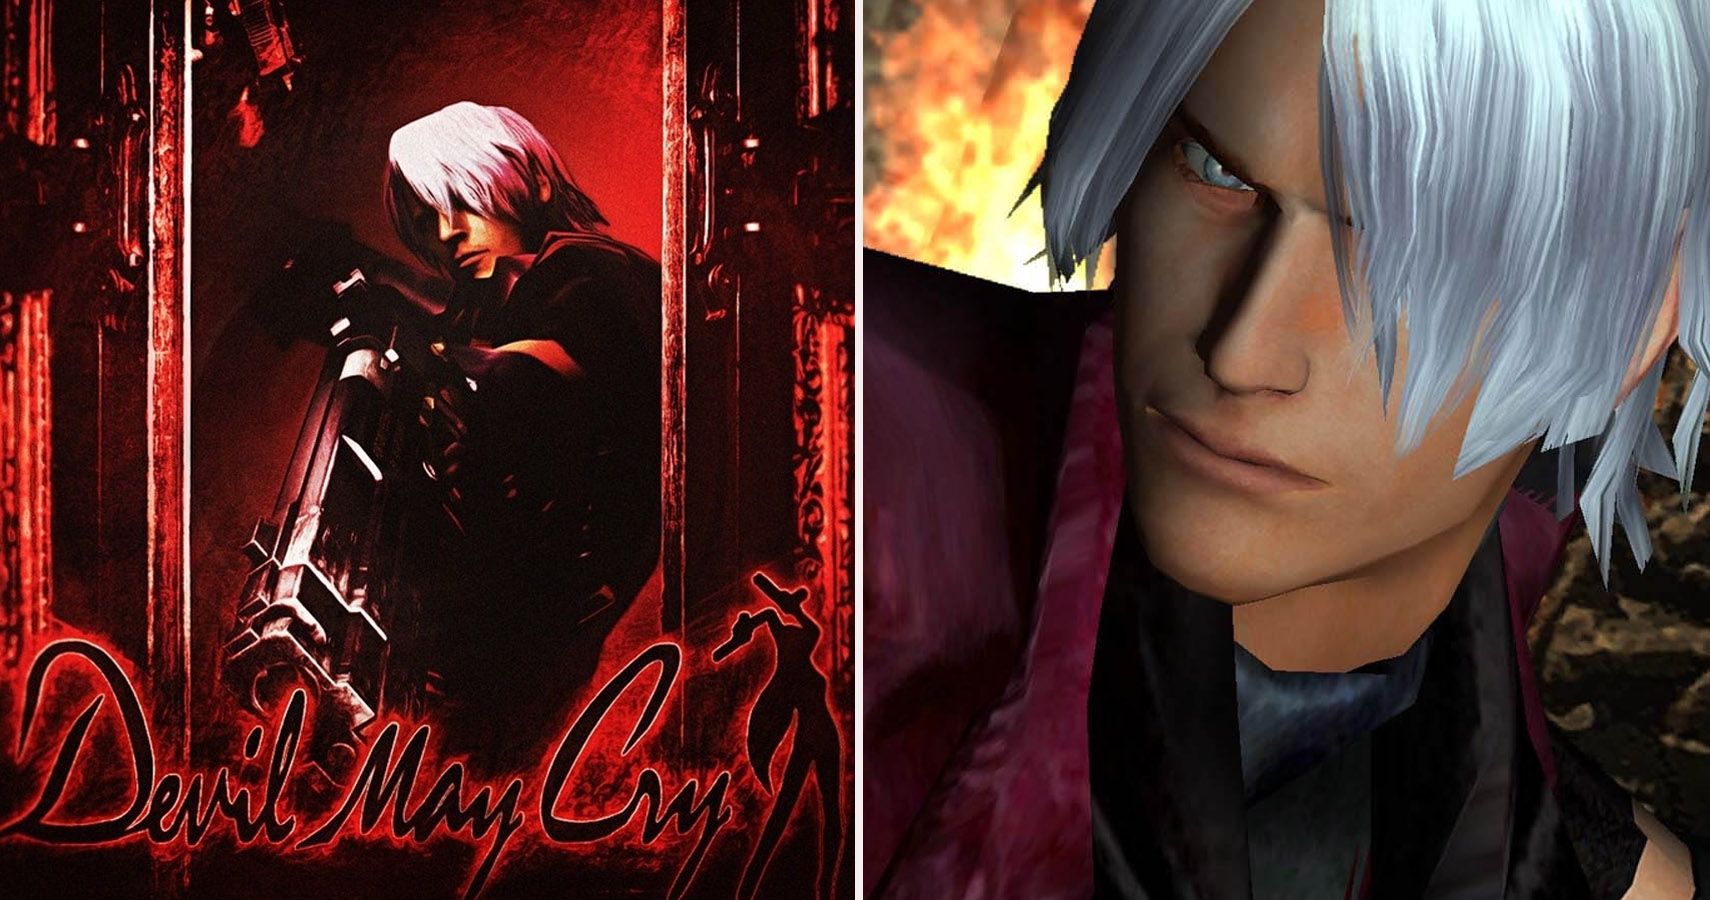 Genre-Shattering Facts About Dante, You Must Know Before Devil May